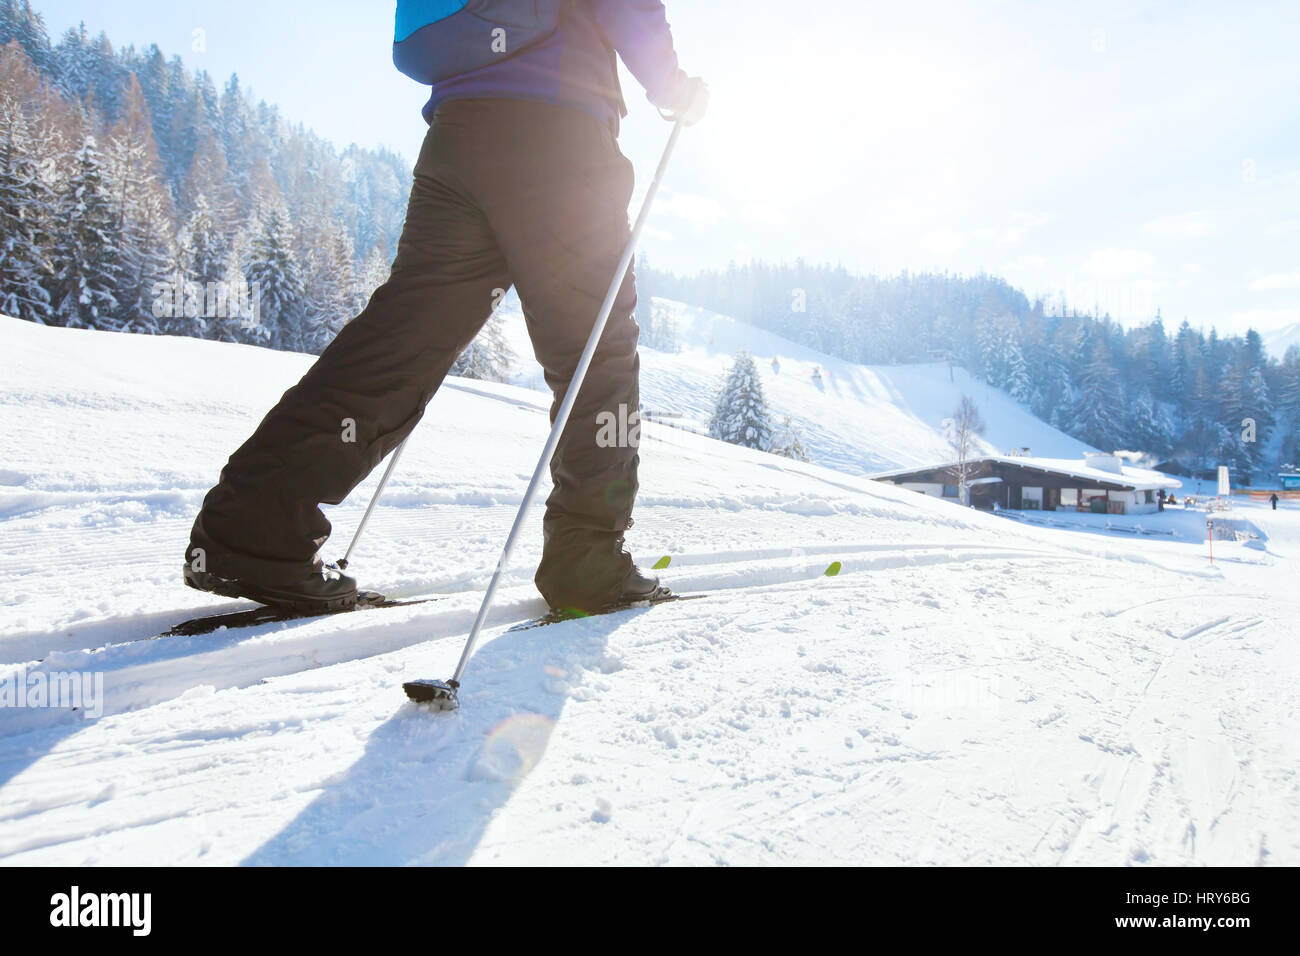 nordic skiing, winter holidays in Alps, cross country skier in mountains Stock Photo